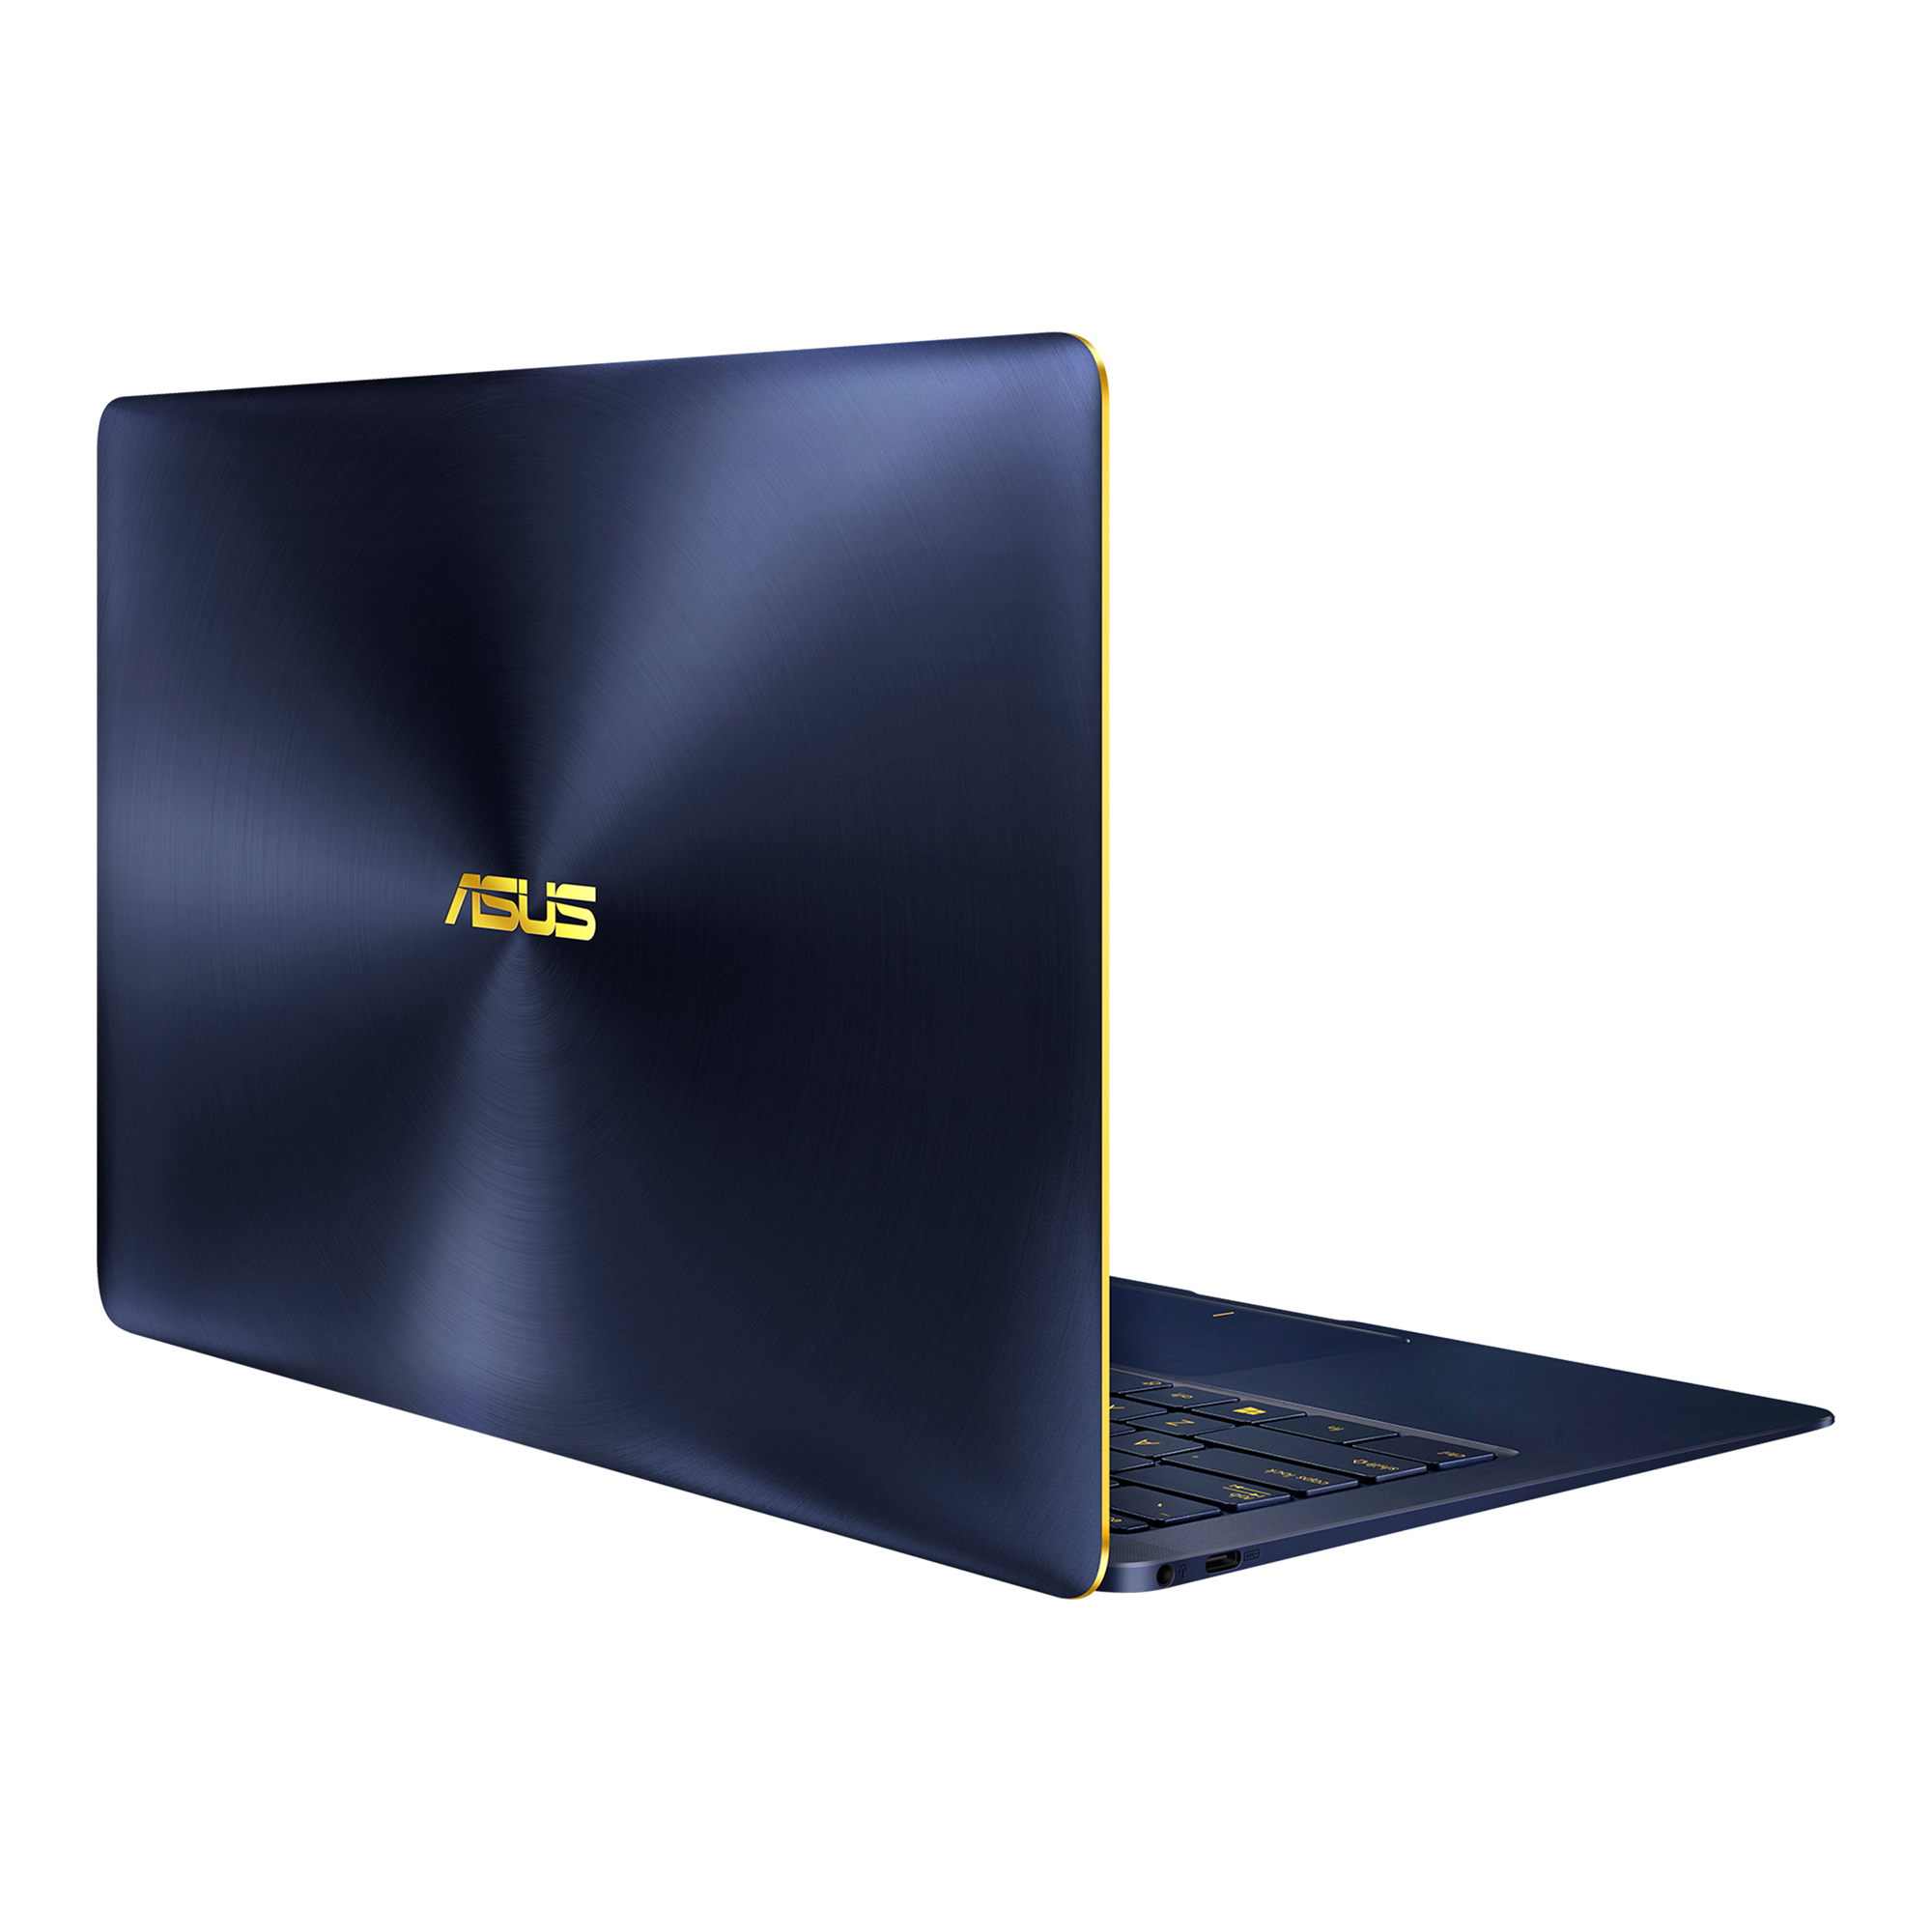 ASUS Zenbook 3 Deluxe UX490｜Laptops For Home｜ASUS Canada